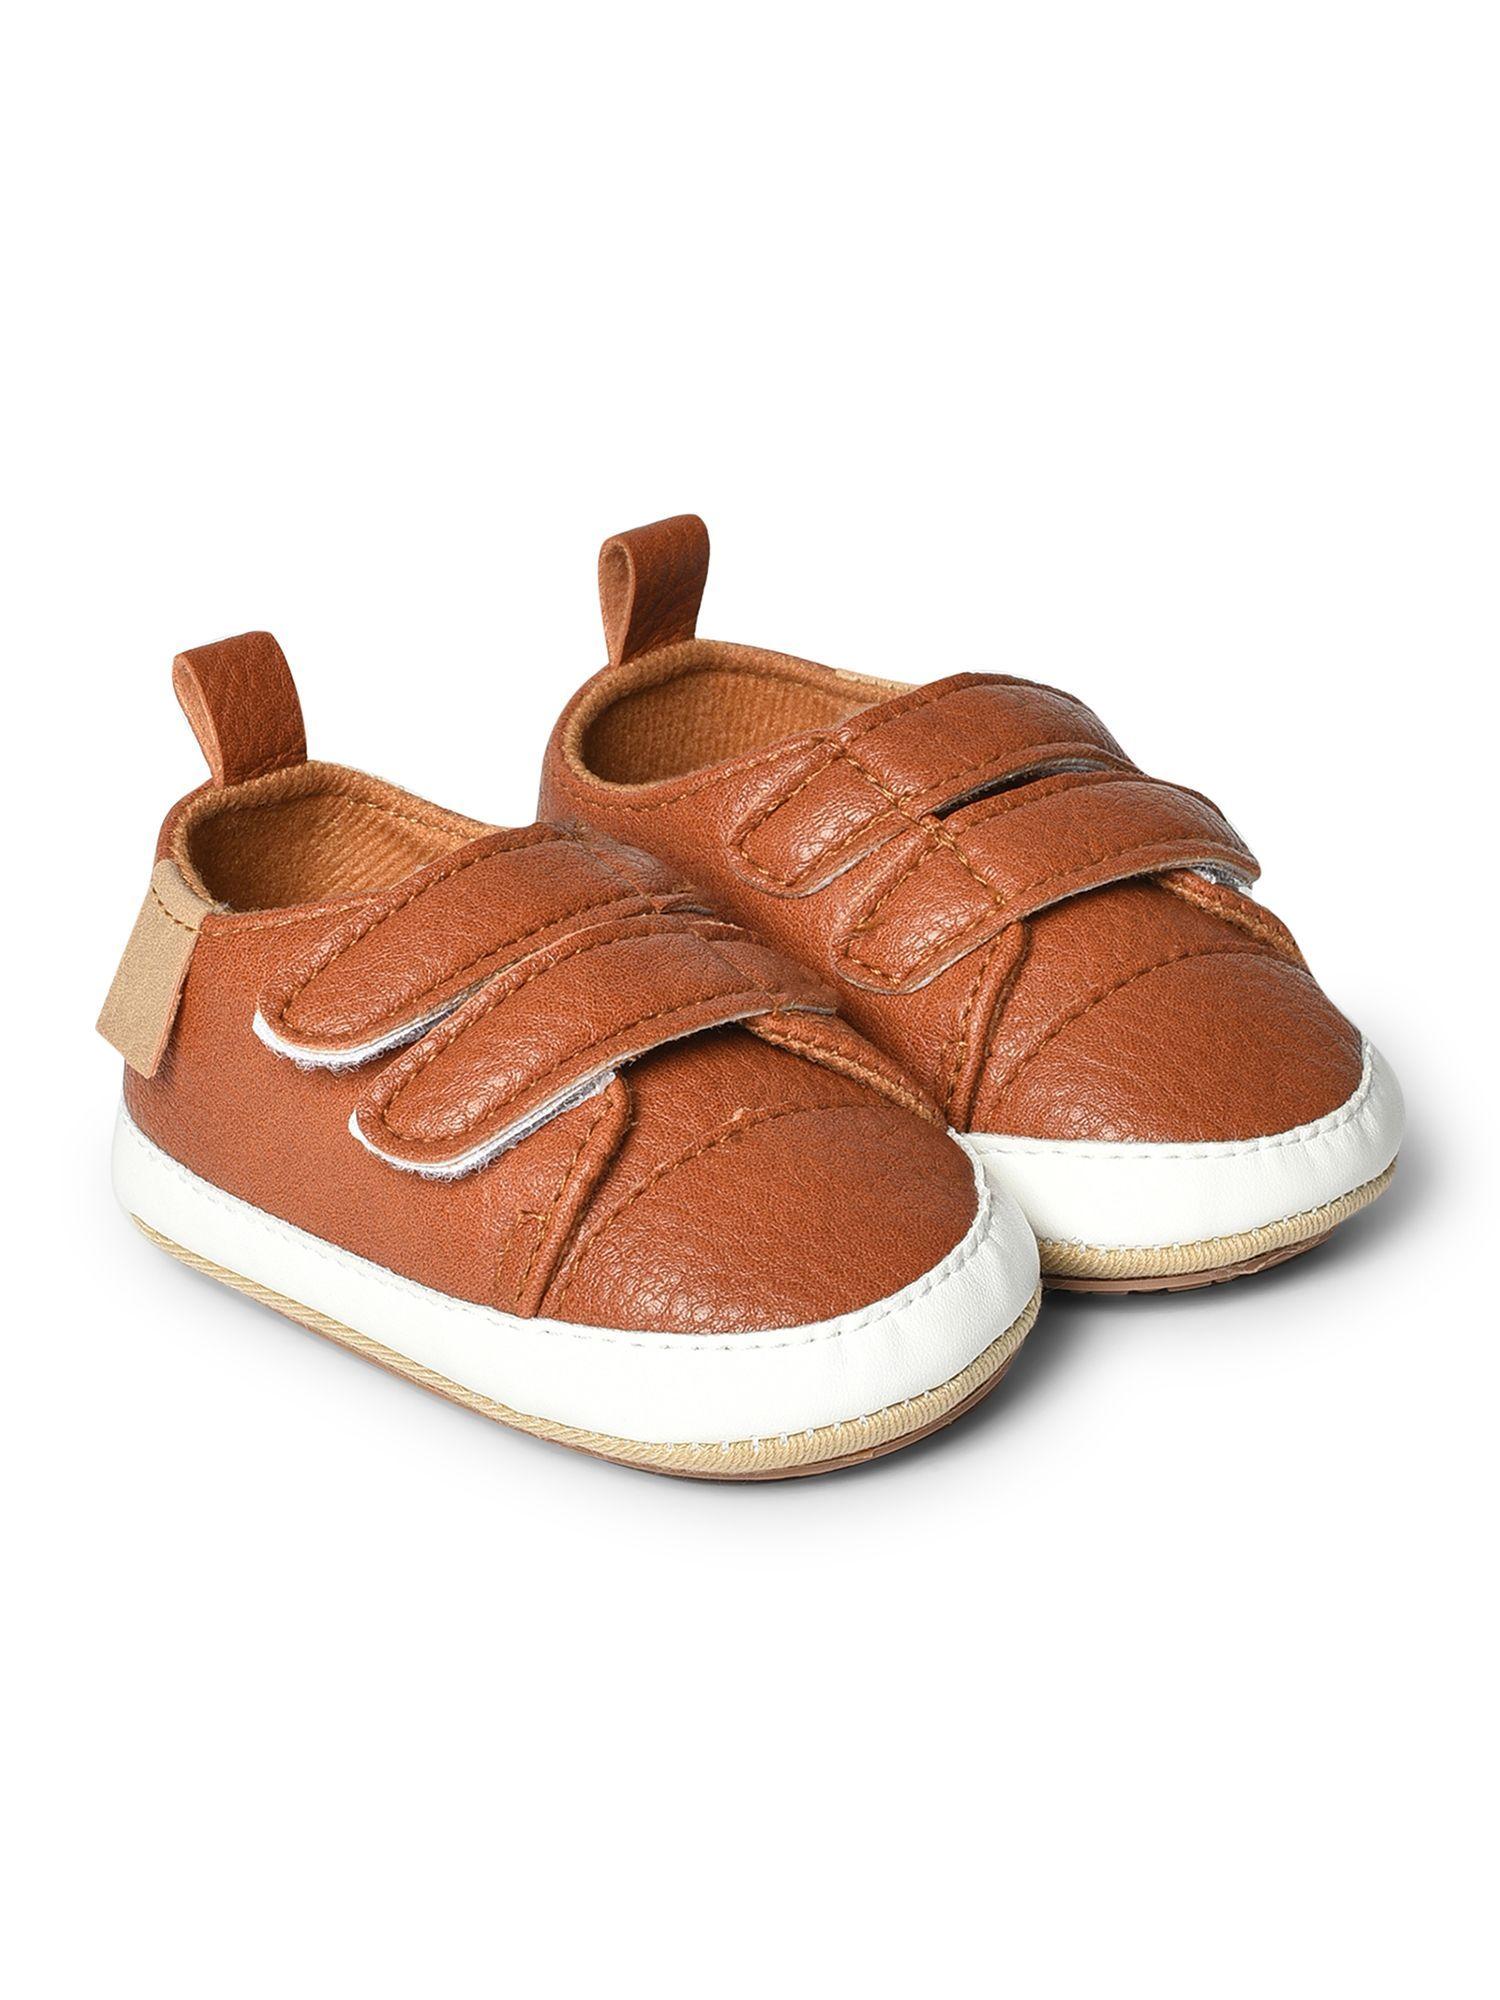 unisex brown solid casual shoes